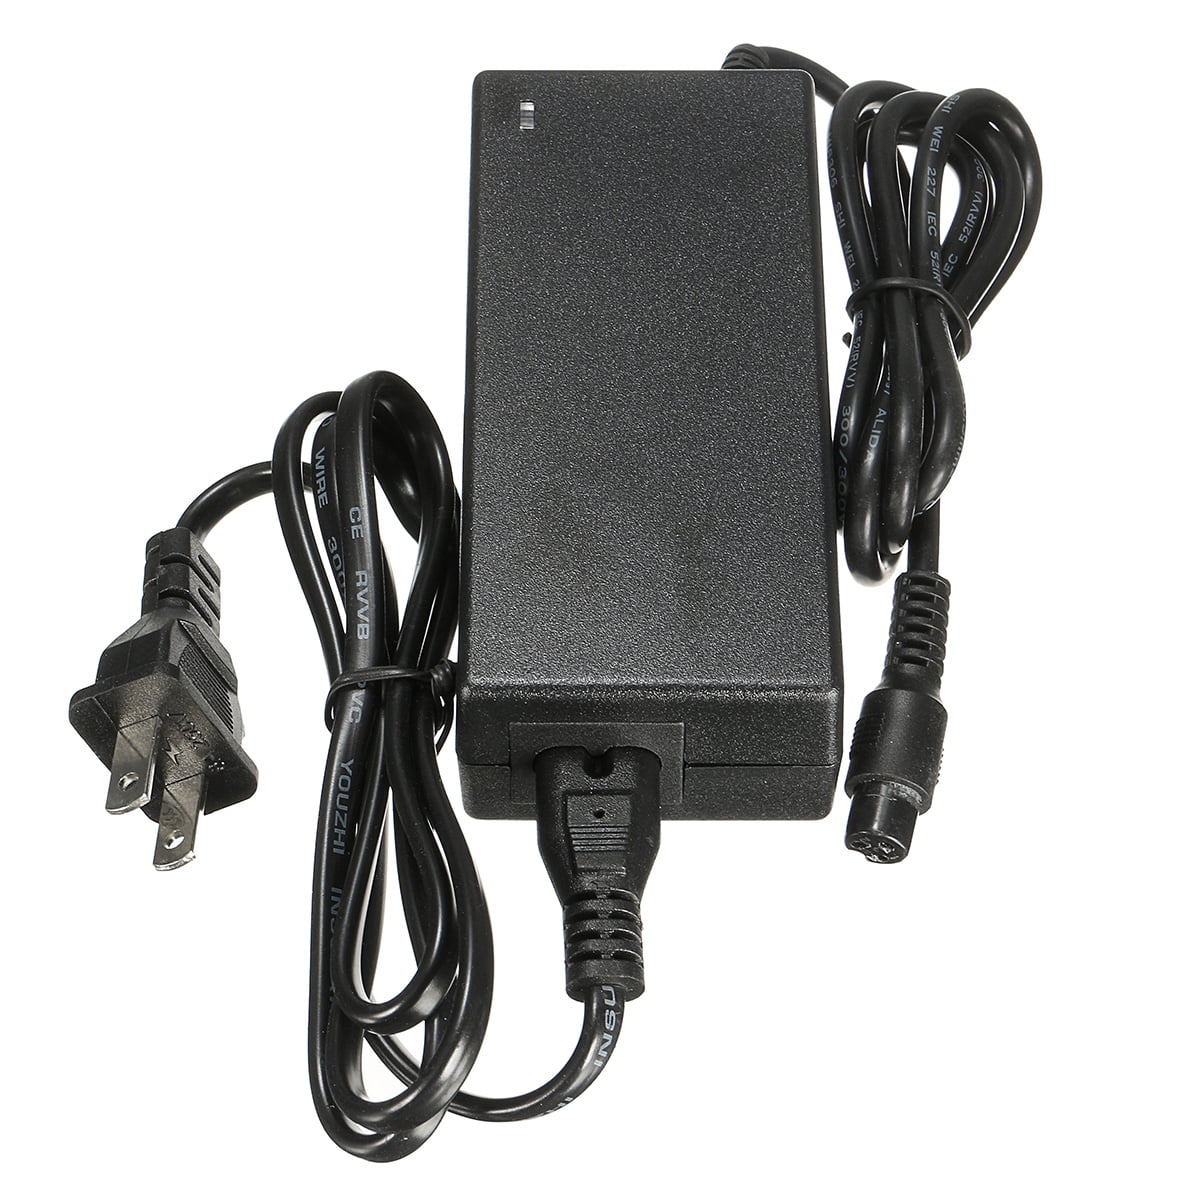 MDA Li-ion Battery Charger Power Supply Adapter Ebike AC DC UL FCC Certs 42V 2A 